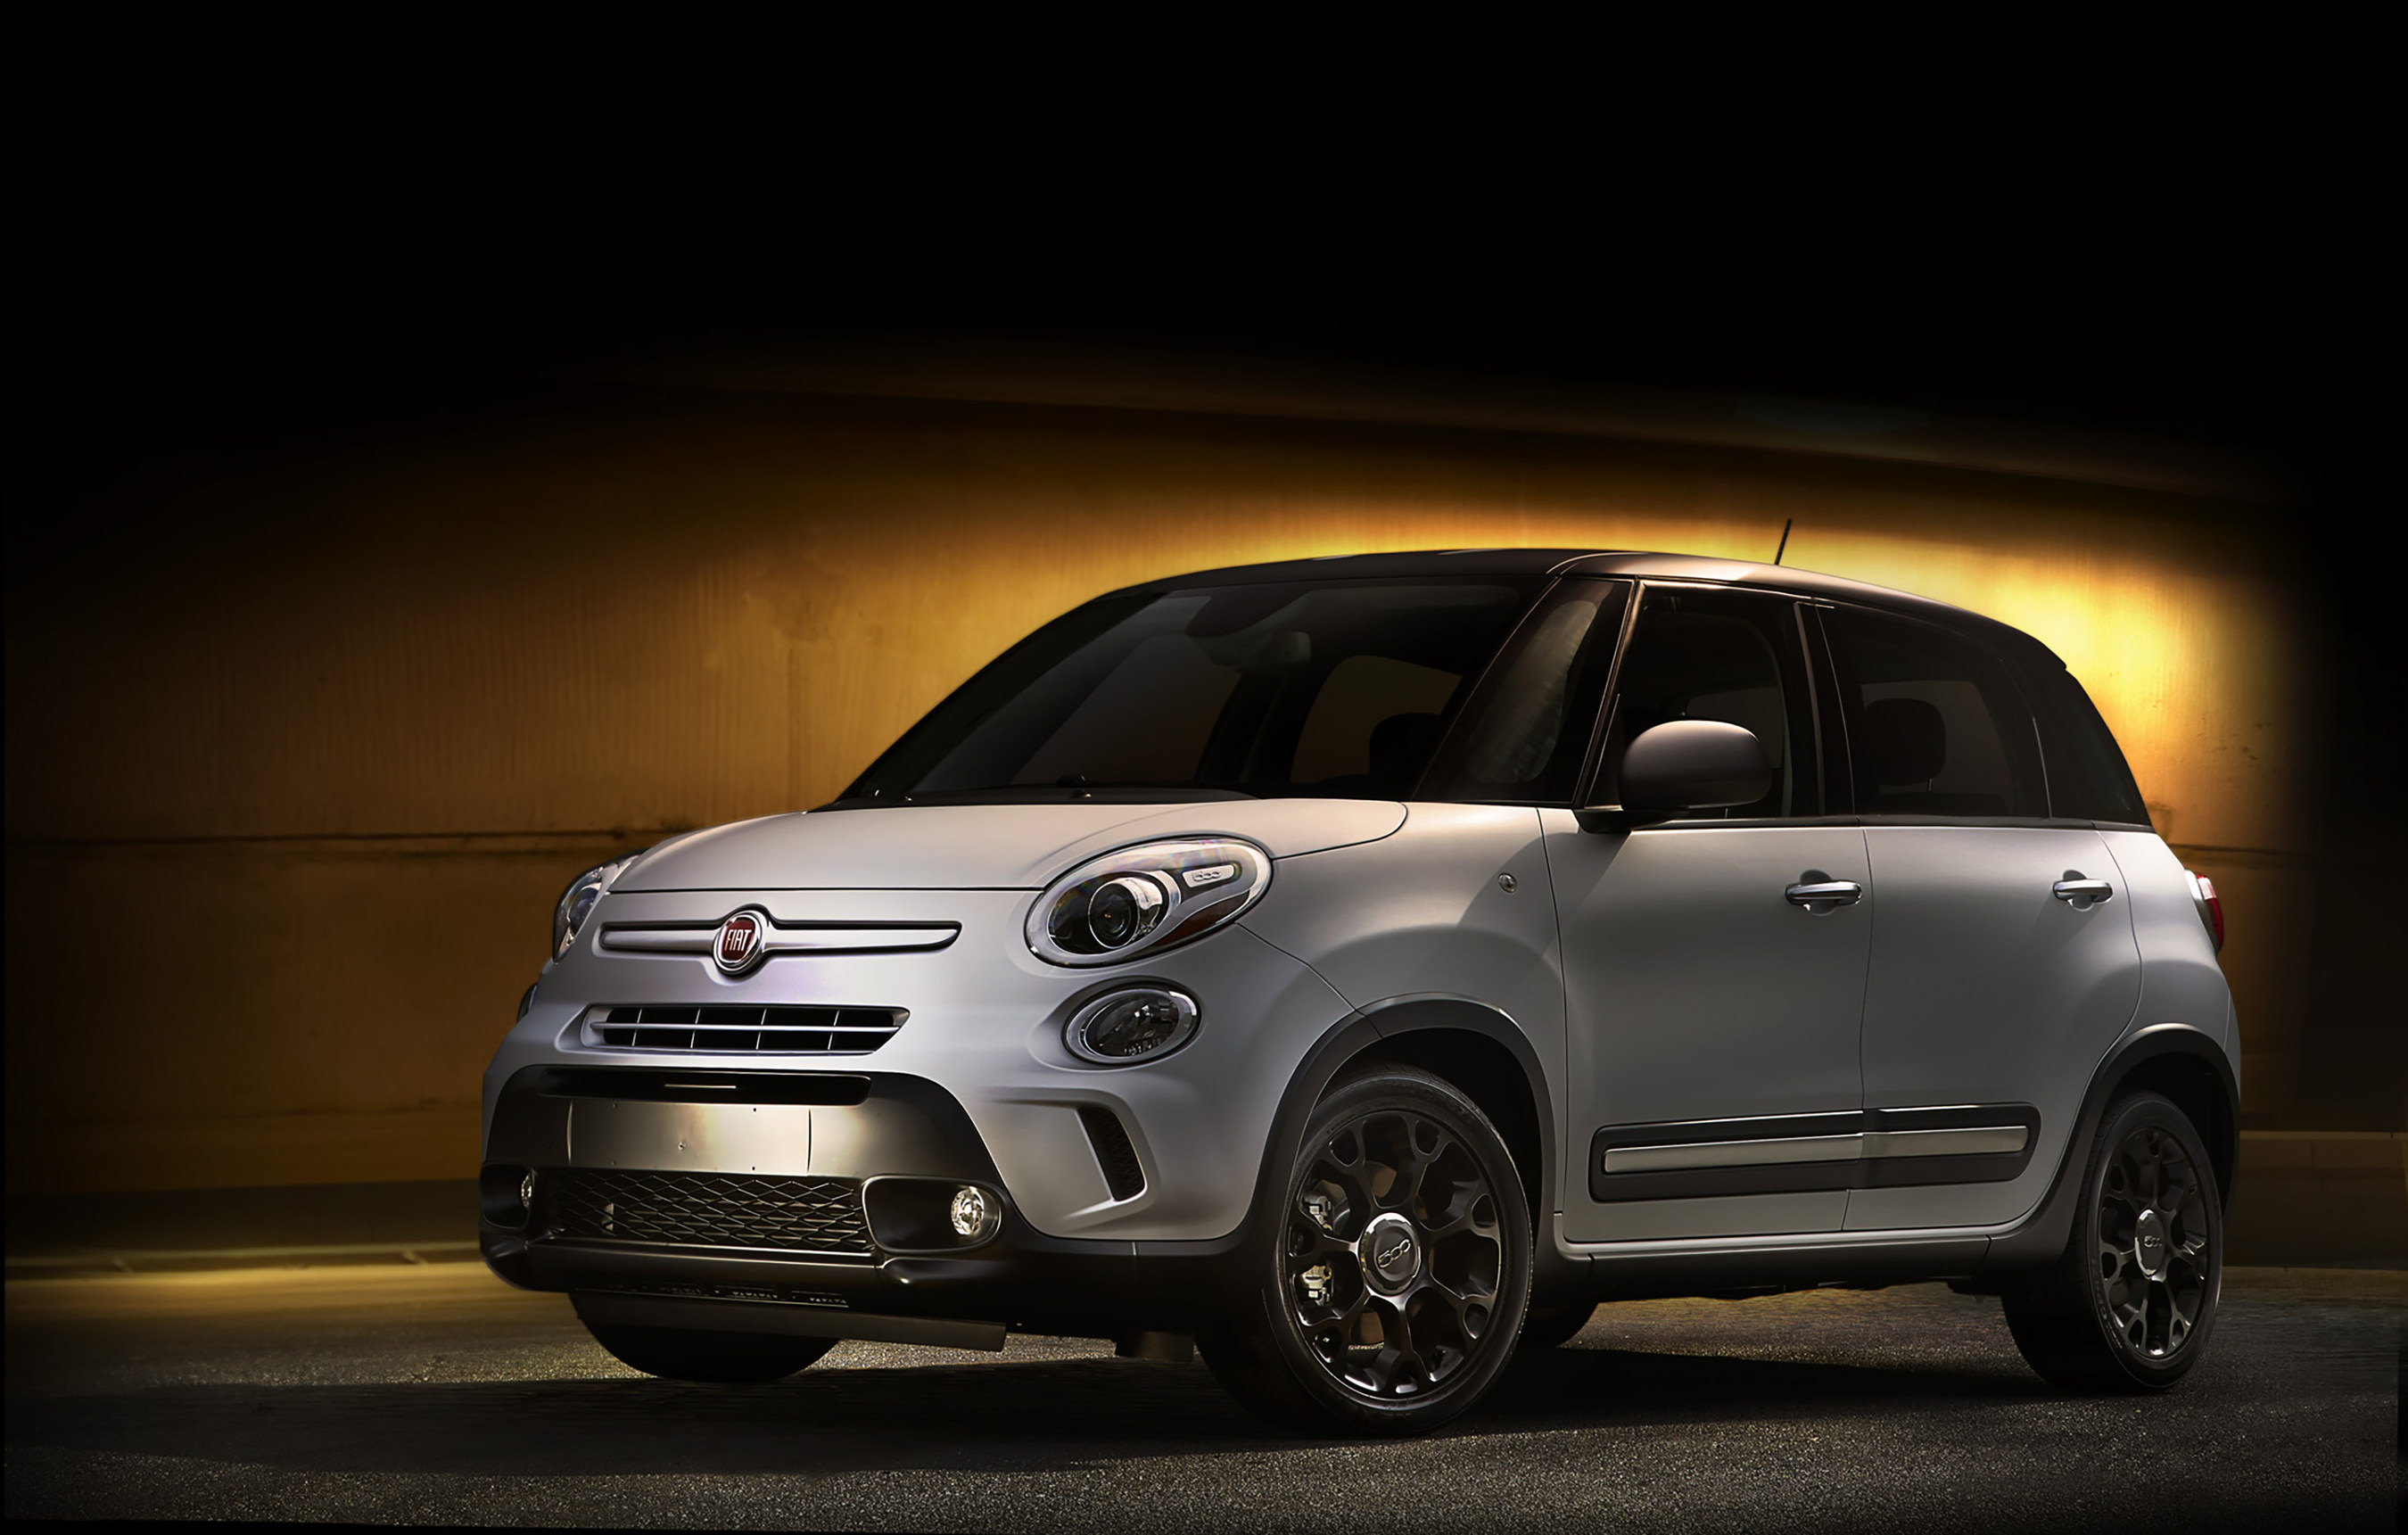 FIAT Brand introduces two special edition vehicles at the 2014 Miami International Auto Show, including the 500L Urbana Trekking